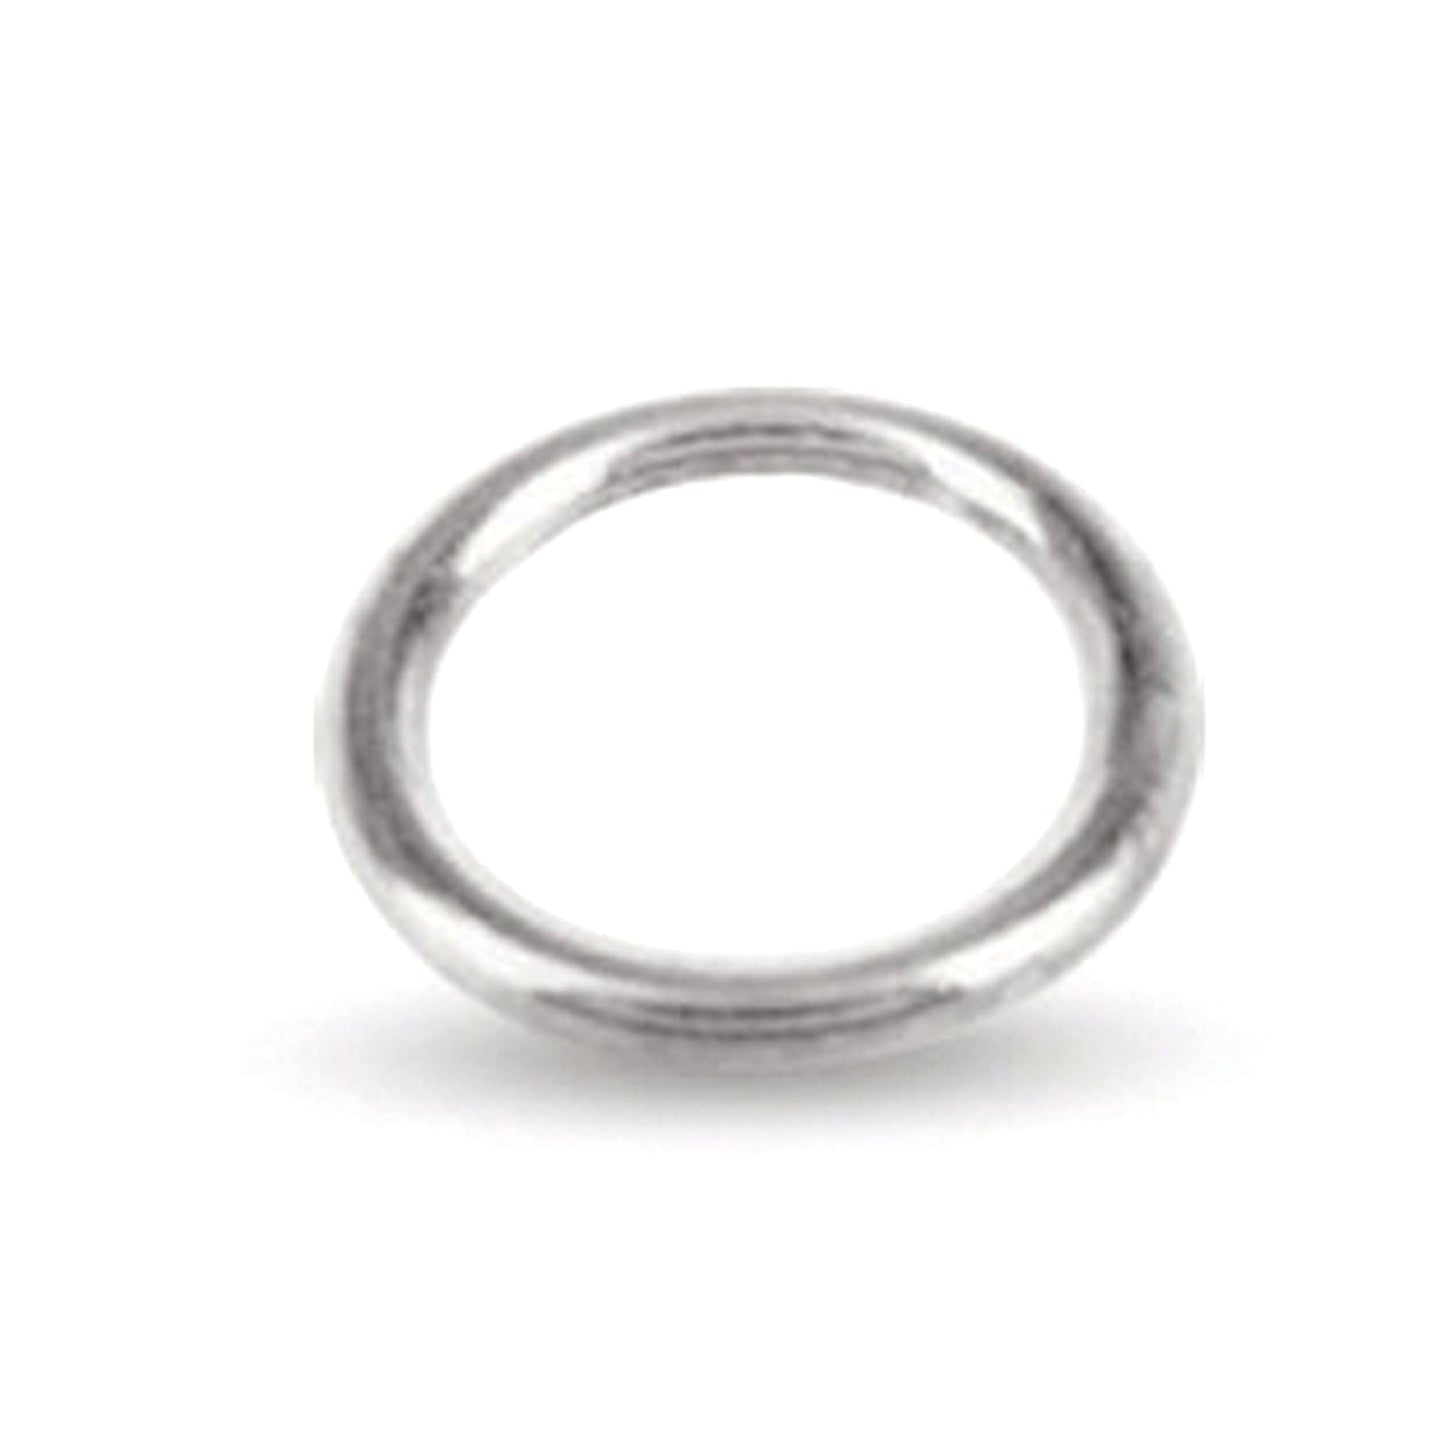 Jump Rings - 5mm x 0.7mm Thickness Closed | SS-JR5C7 | Jewellery Making Supply